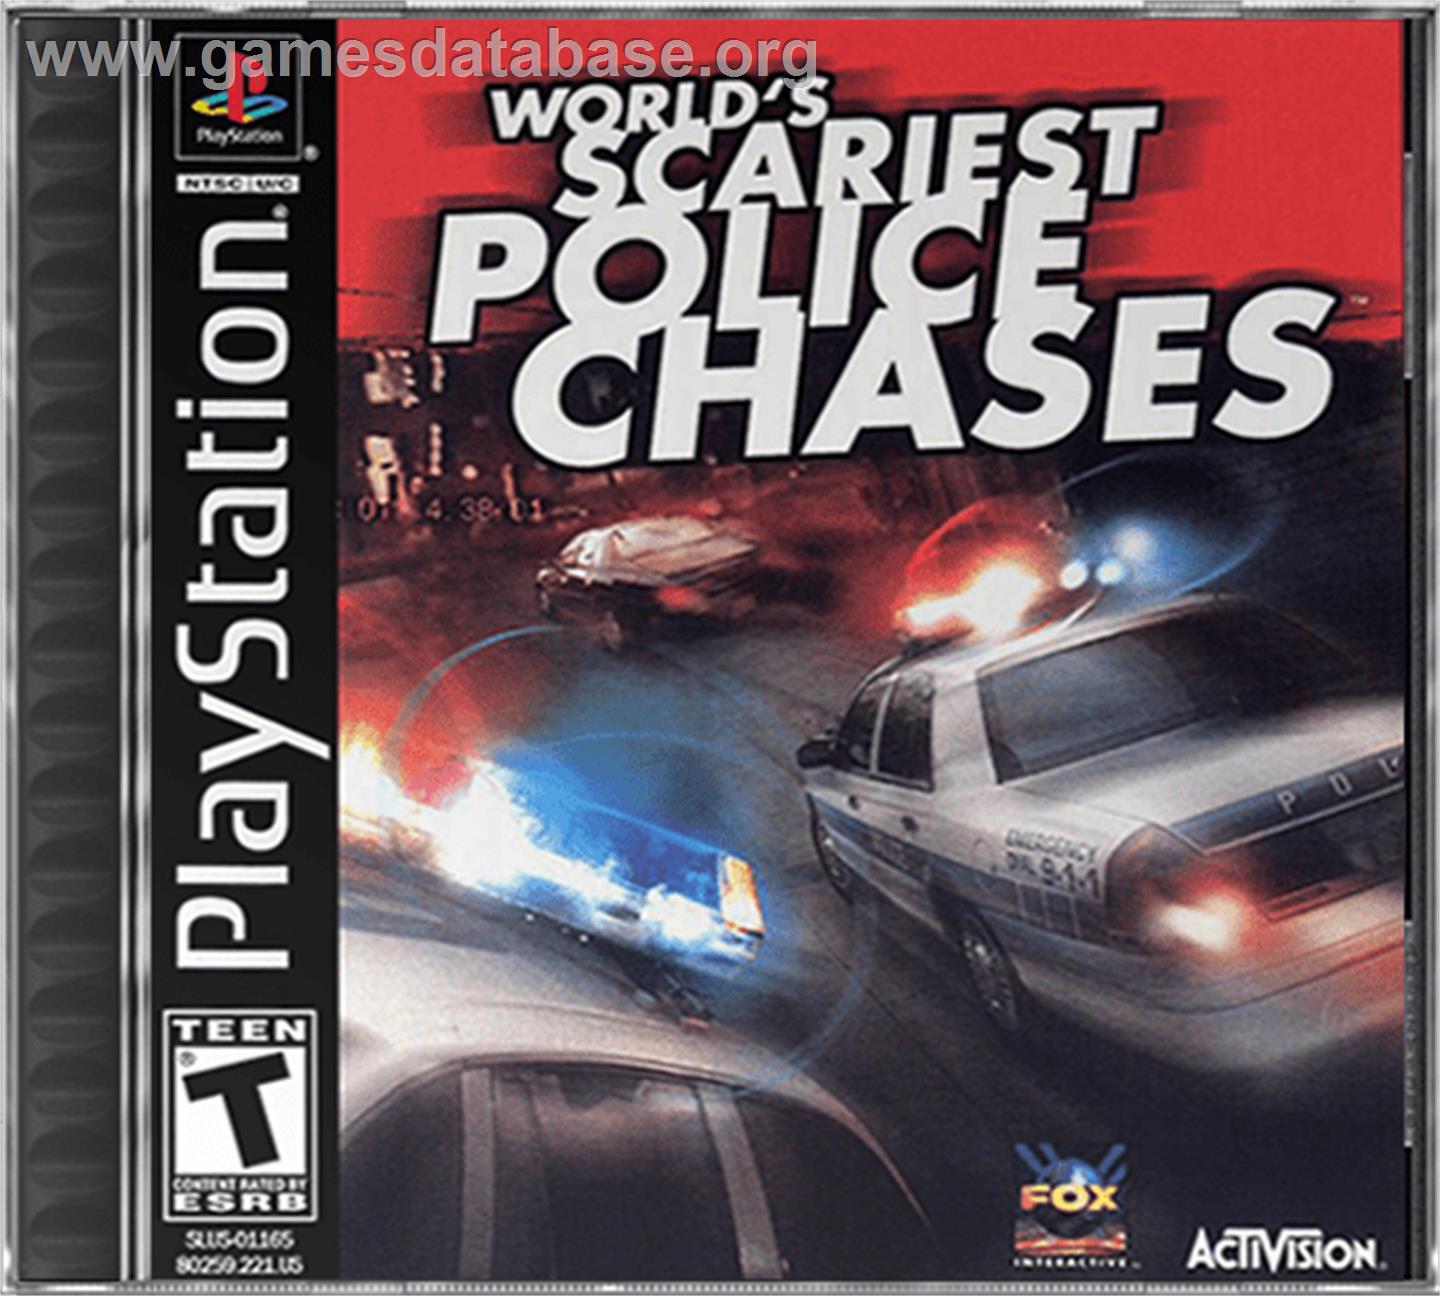 World's Scariest Police Chases - Sony Playstation - Artwork - Box